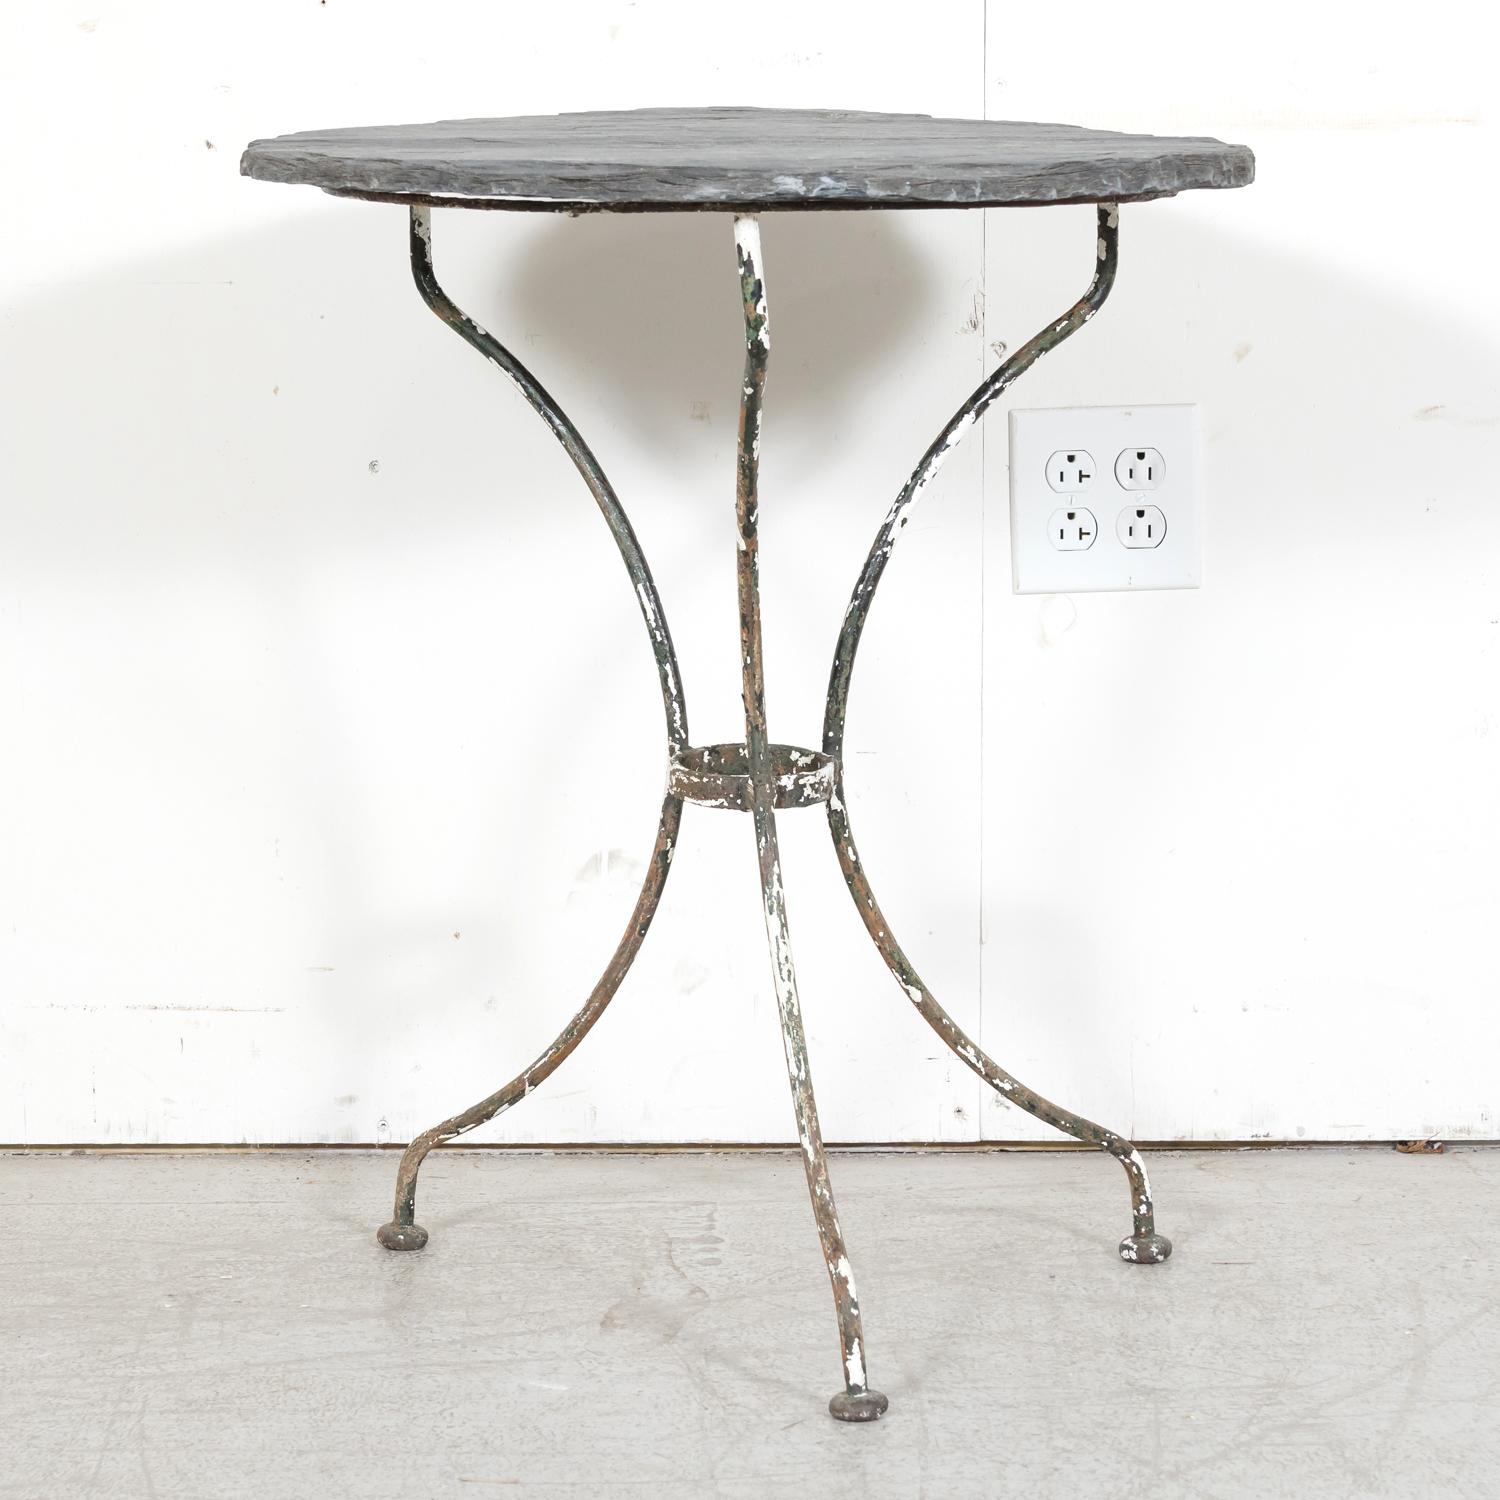 A 19th century French cast iron bistro or garden table, circa 1880s, featuring a slate top resting on a painted iron tri-form base. The base boasts three scrolled legs joined with a circular iron stretcher, adding both stability and visual appeal.